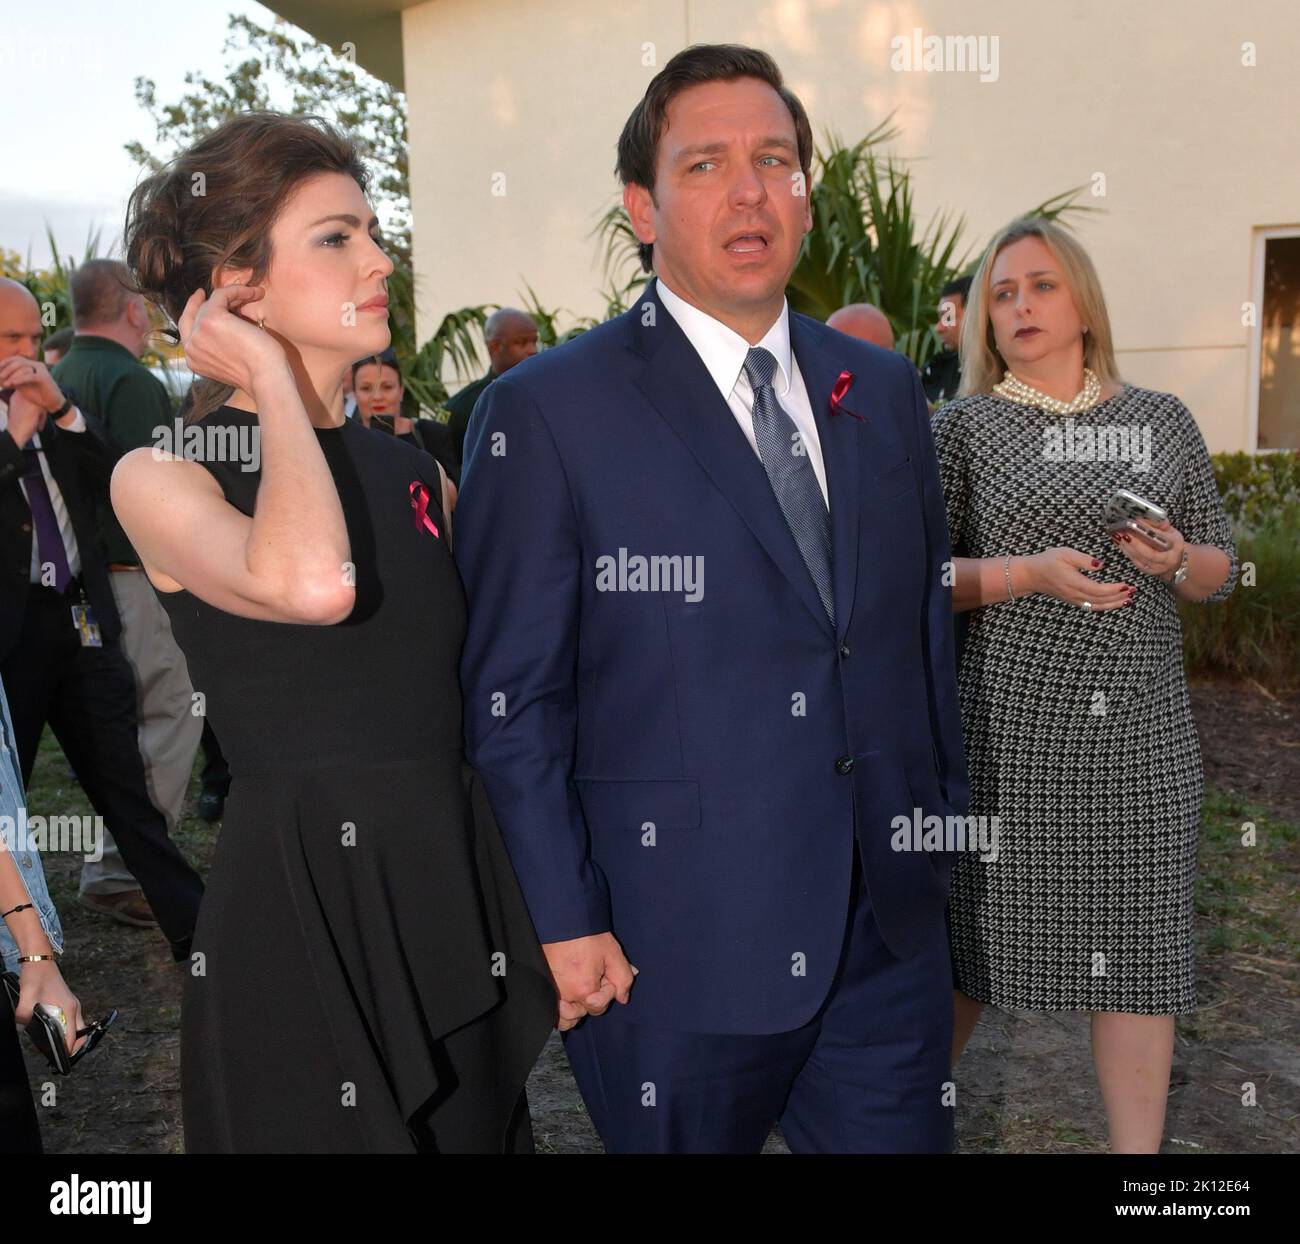 PARKLAND, FL - FEBRUARY 14: Gov Ron DeSantis and wife Casey DeSantis watch ceremony with tears in their eyes. Seventeen people were shot and killed by an ex-student at Marjory Stoneman Douglas High School (MSD) in Parkland, Florida on 14 February 2018. Students and educators across the country are also marking the day with vigils, moments of silence, art projects and other demonstrations. Police originally arrested 19-year-old former student Nikolas Cruz for killing 17 people at the Marjory Stoneman Douglas High School, at Pine Trail Park on February 14, 2019 in Parkland, Florida   People:  Go Stock Photo